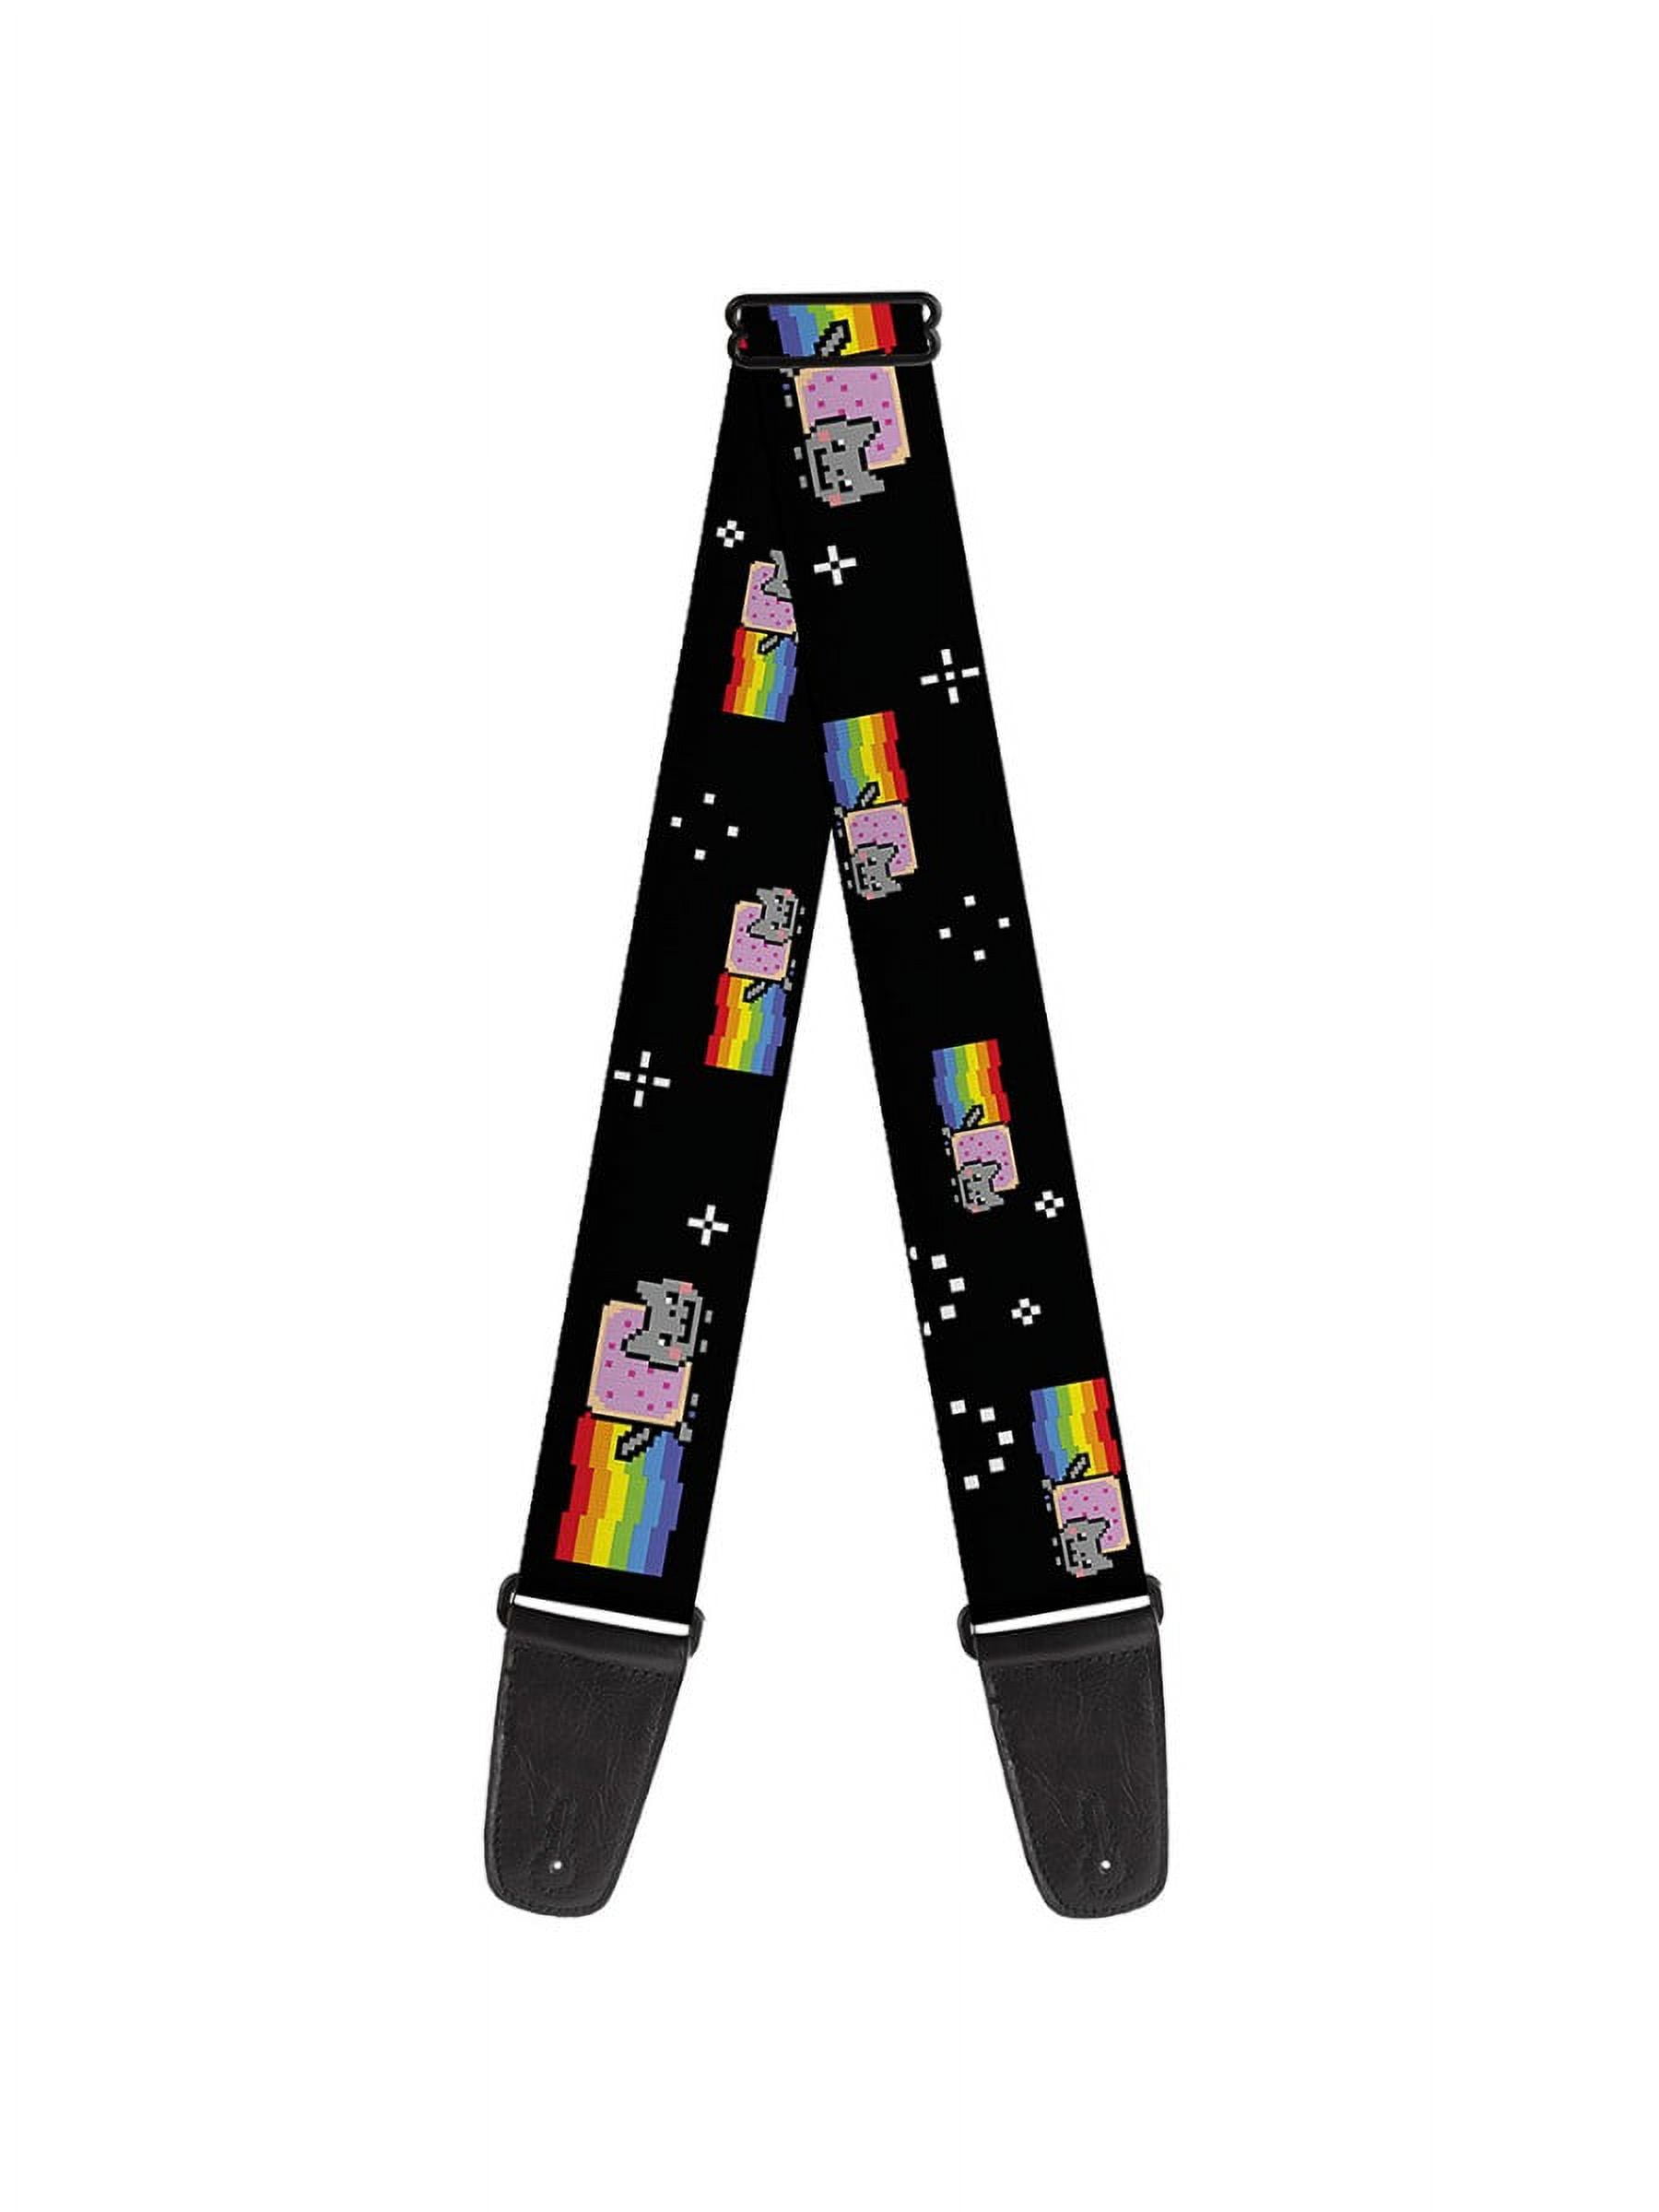 Buckle-Down Guitar Strap - Nyan Cat Flying in Space Black - 2 Wide -  29-54 Length 